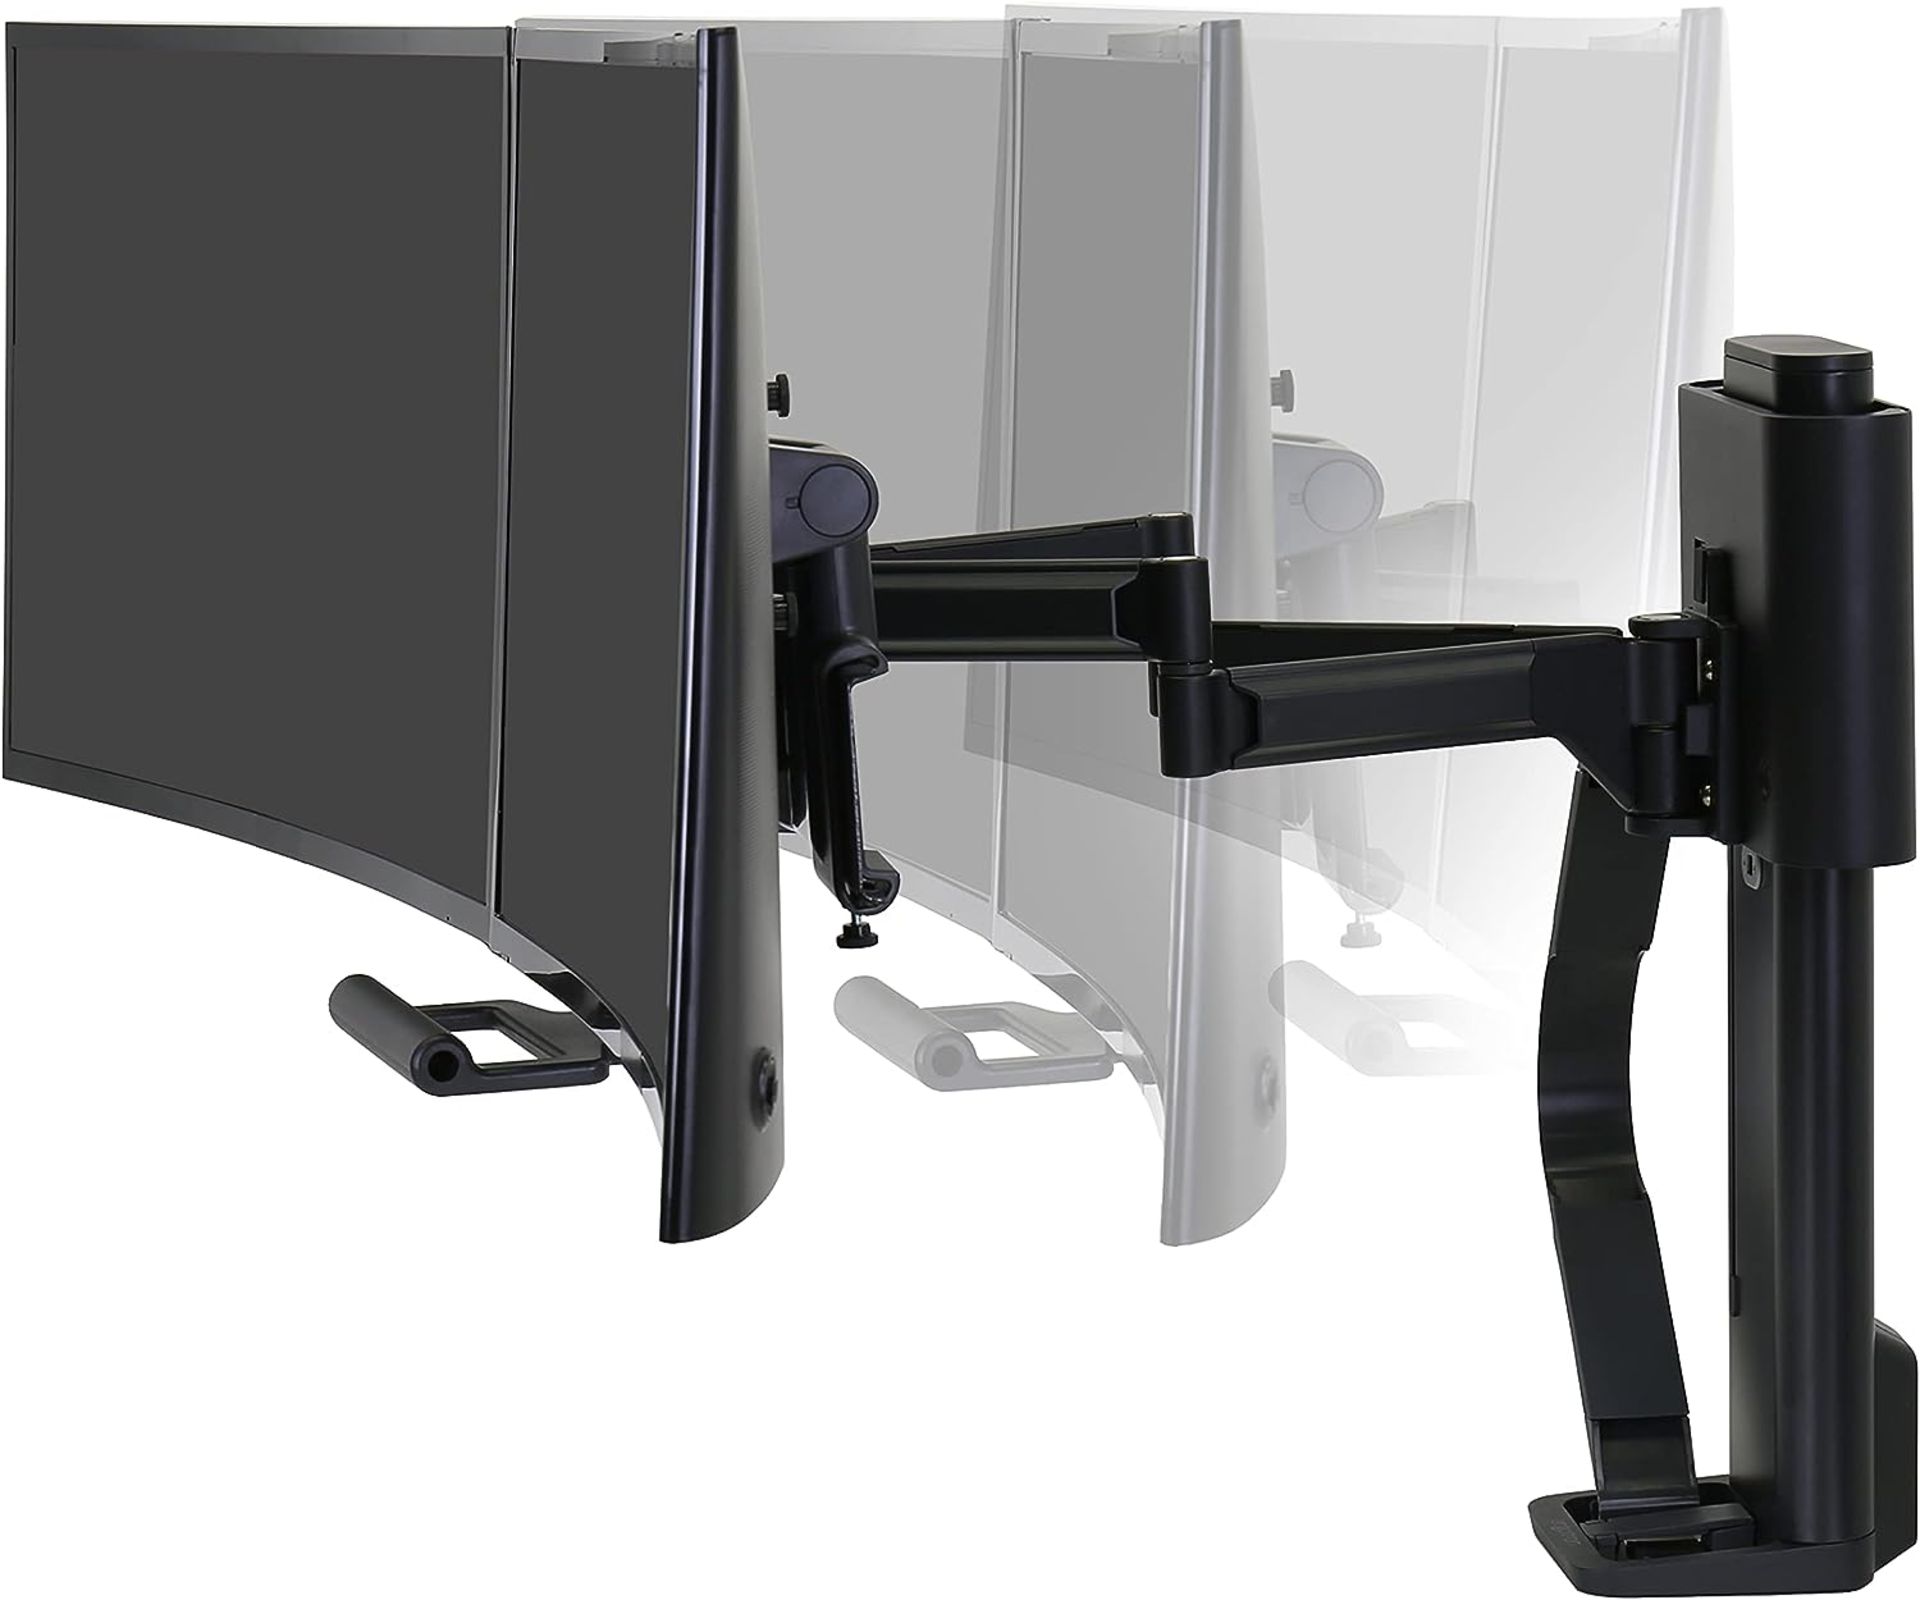 NEW & BOXED ERGOTRON Trace Dual Monitor Arm, VESA Desk Mount. RRP £417. for 2 Monitors Up to 27 - Image 2 of 8